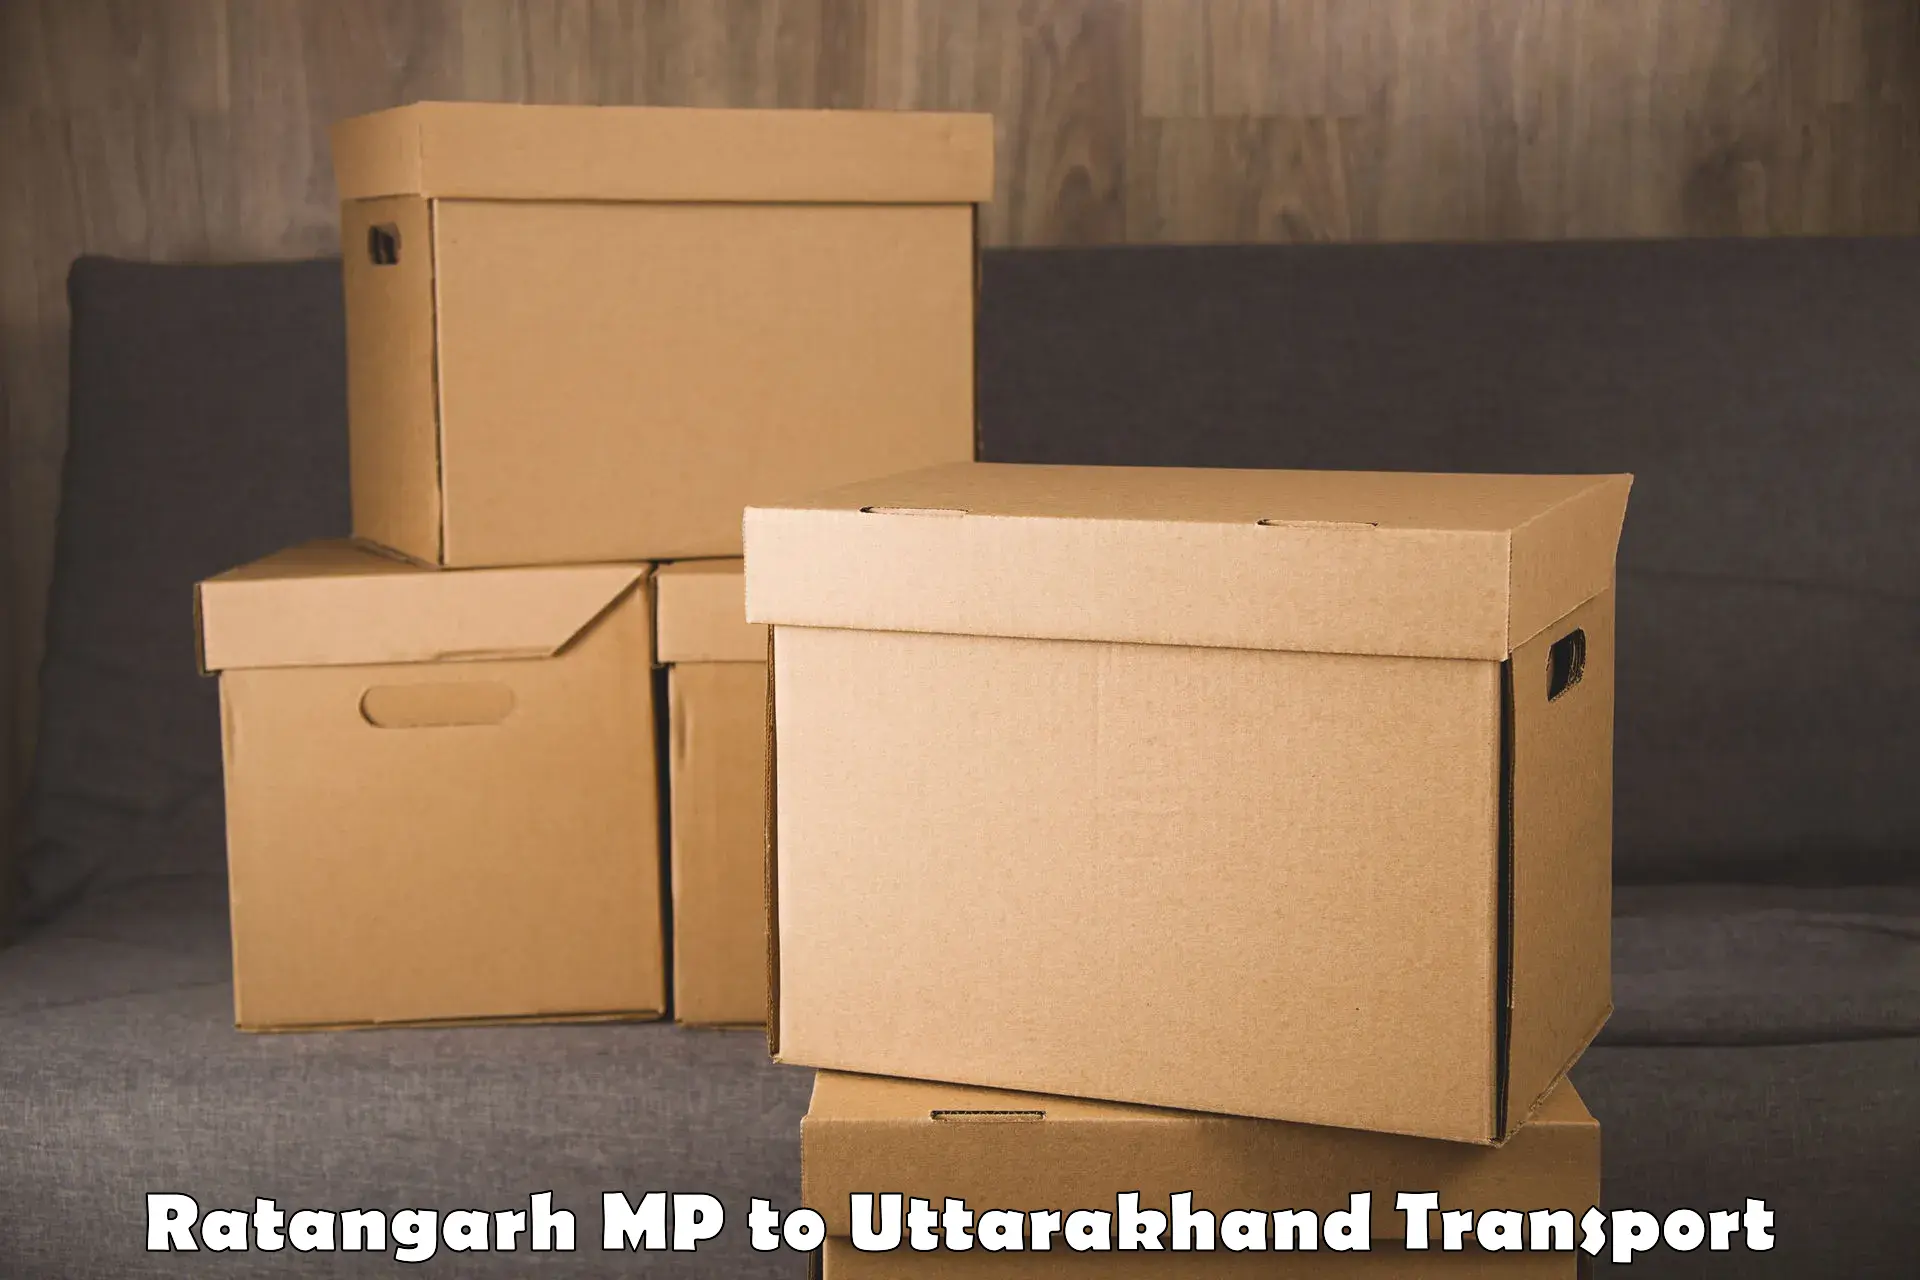 Two wheeler parcel service Ratangarh MP to Lohaghat